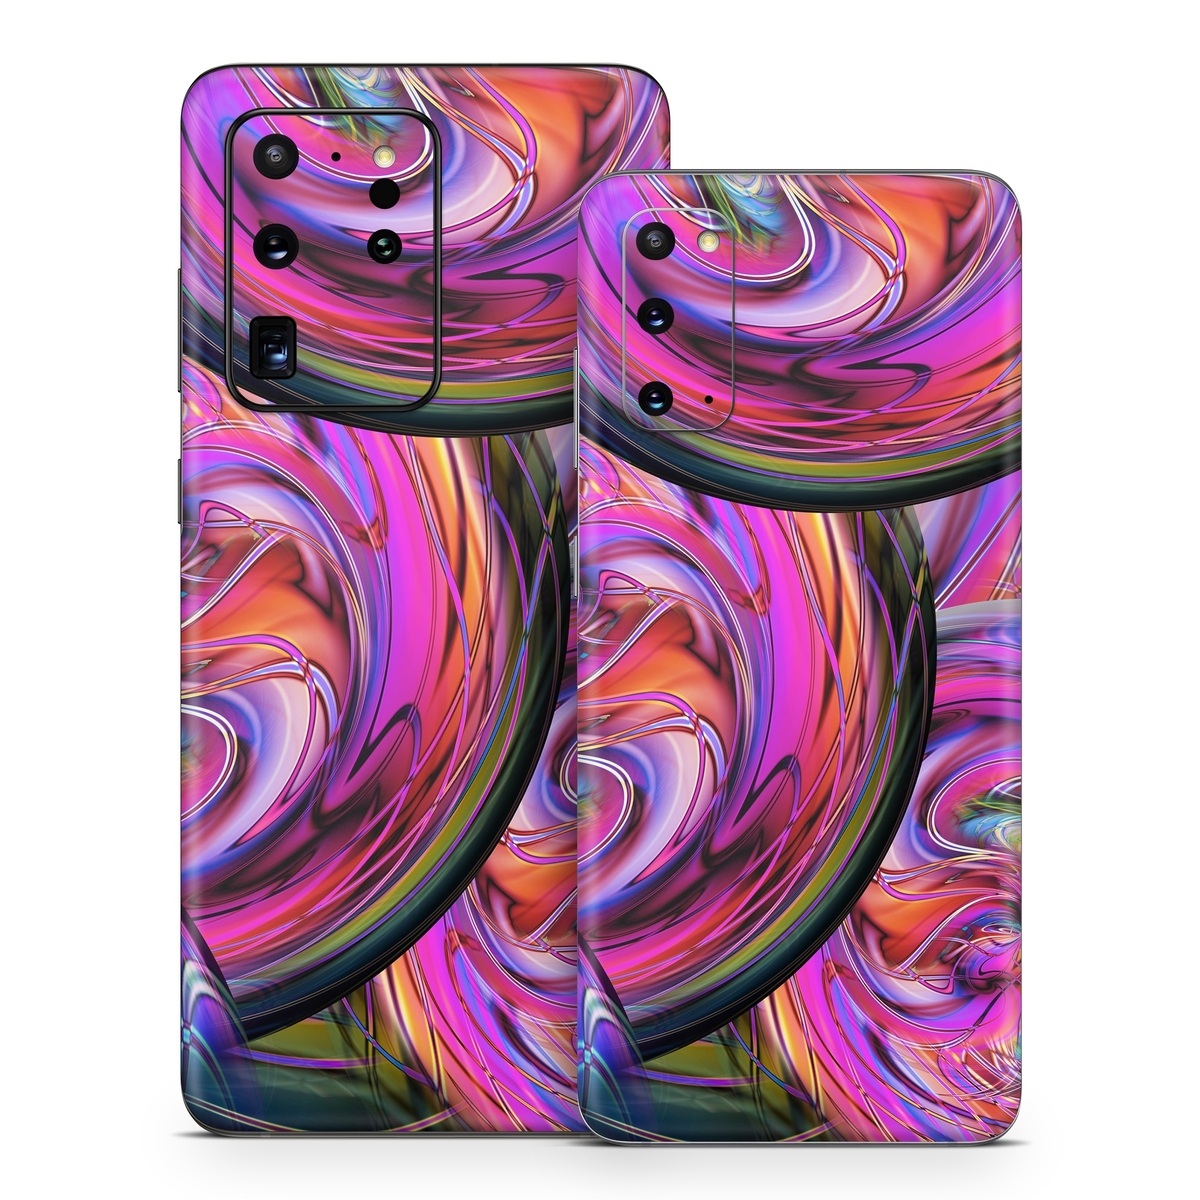 Samsung Galaxy S20 Series Skin design of Pattern, Psychedelic art, Purple, Art, Fractal art, Design, Graphic design, Colorfulness, Textile, Visual arts, with purple, black, red, gray, blue, green colors